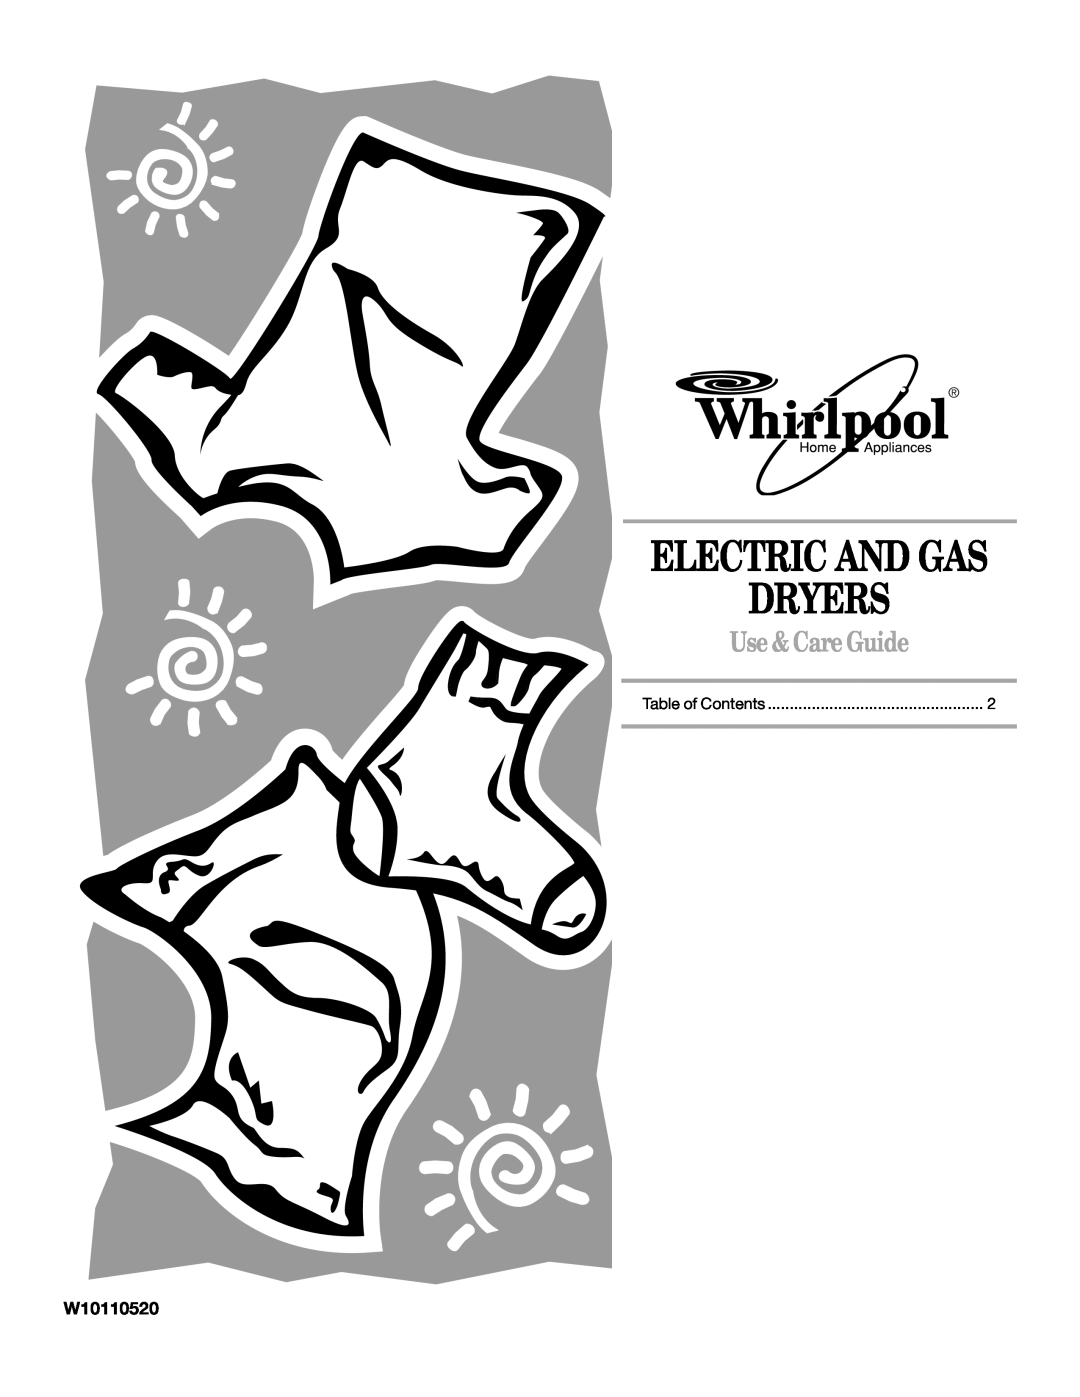 Whirlpool Top-Load Dryer manual Electric And Gas Dryers, Use & Care Guide 